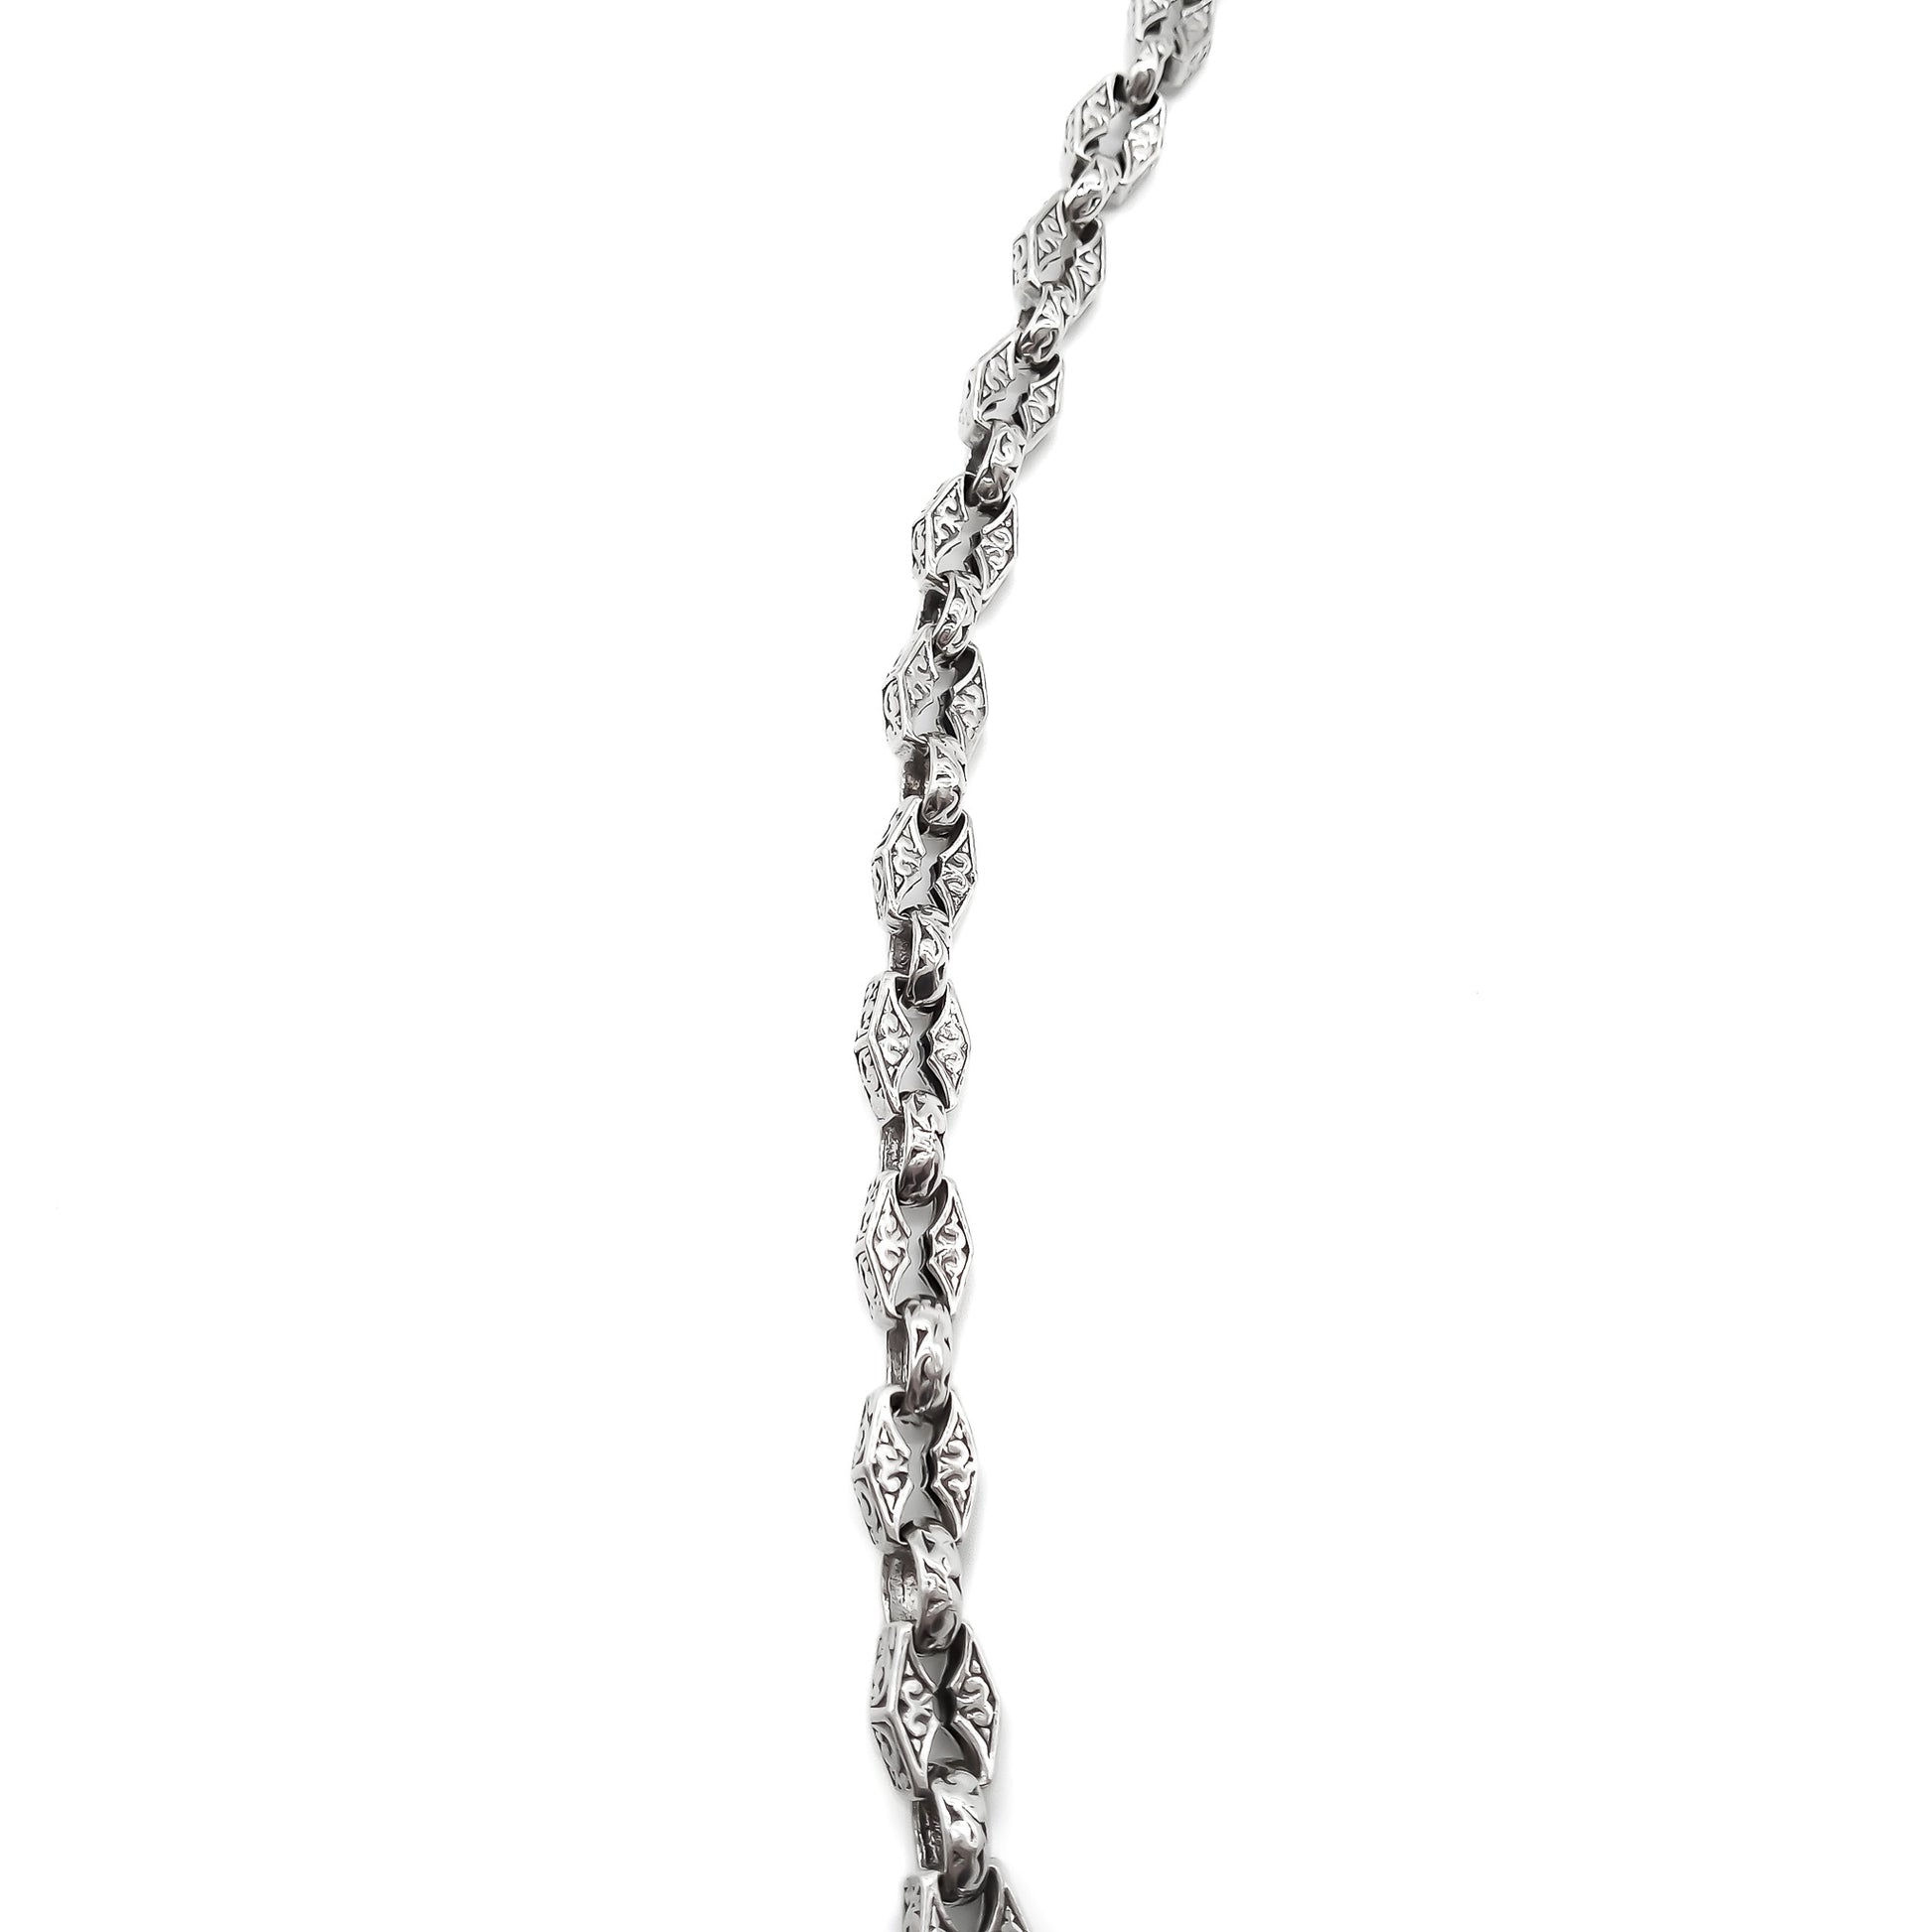 Magnificent sterling silver Victorian-style chain with ornate engraved links and a sturdy dog-clip. Long enough to drape around the neck twice.